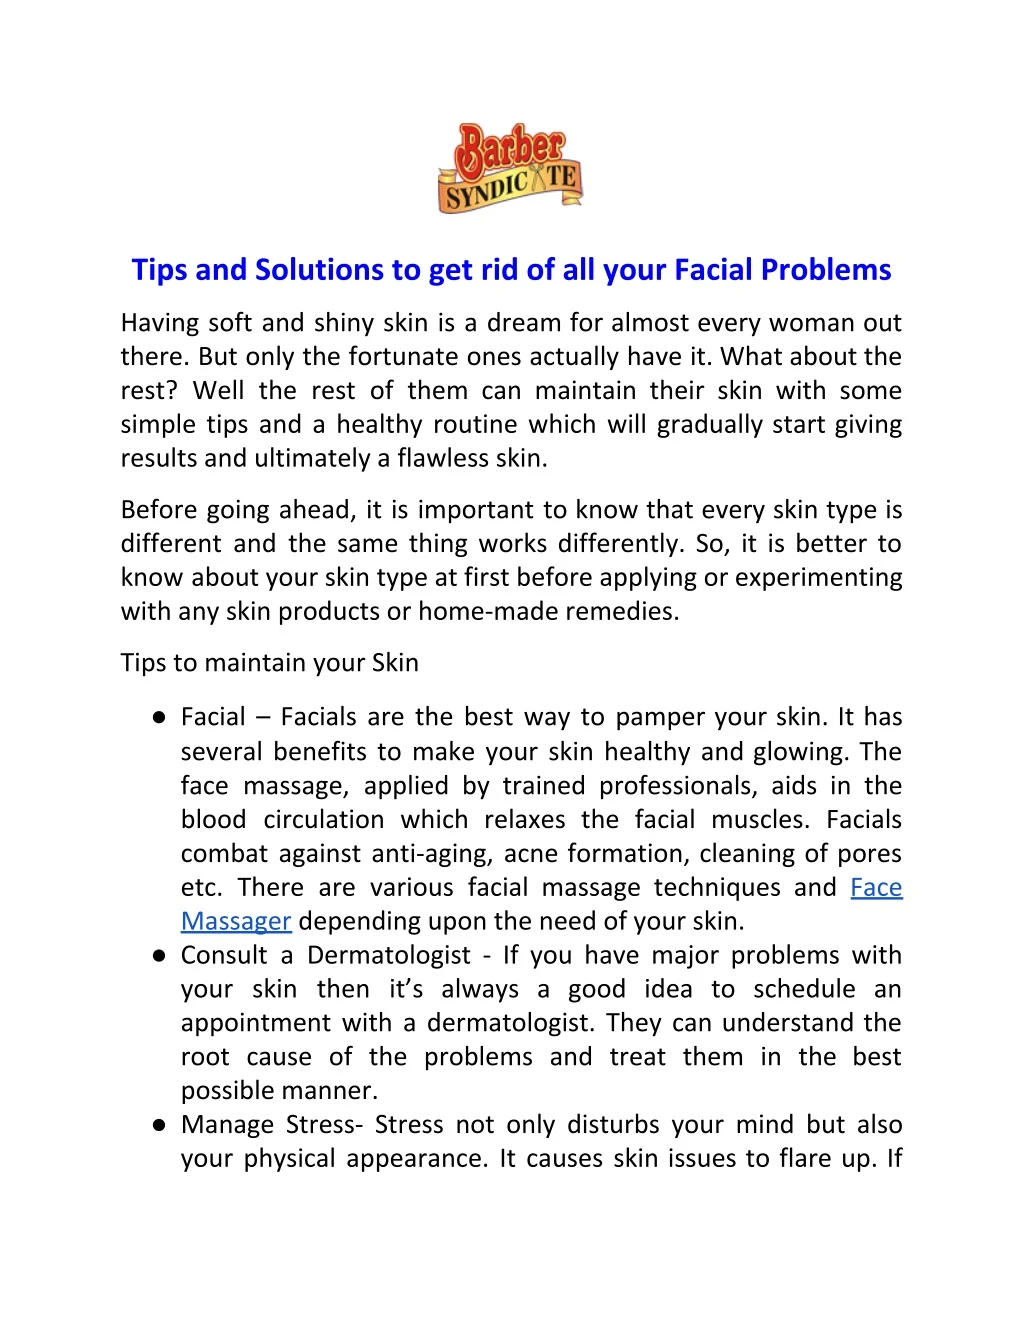 tips and solutions to get rid of all your facial